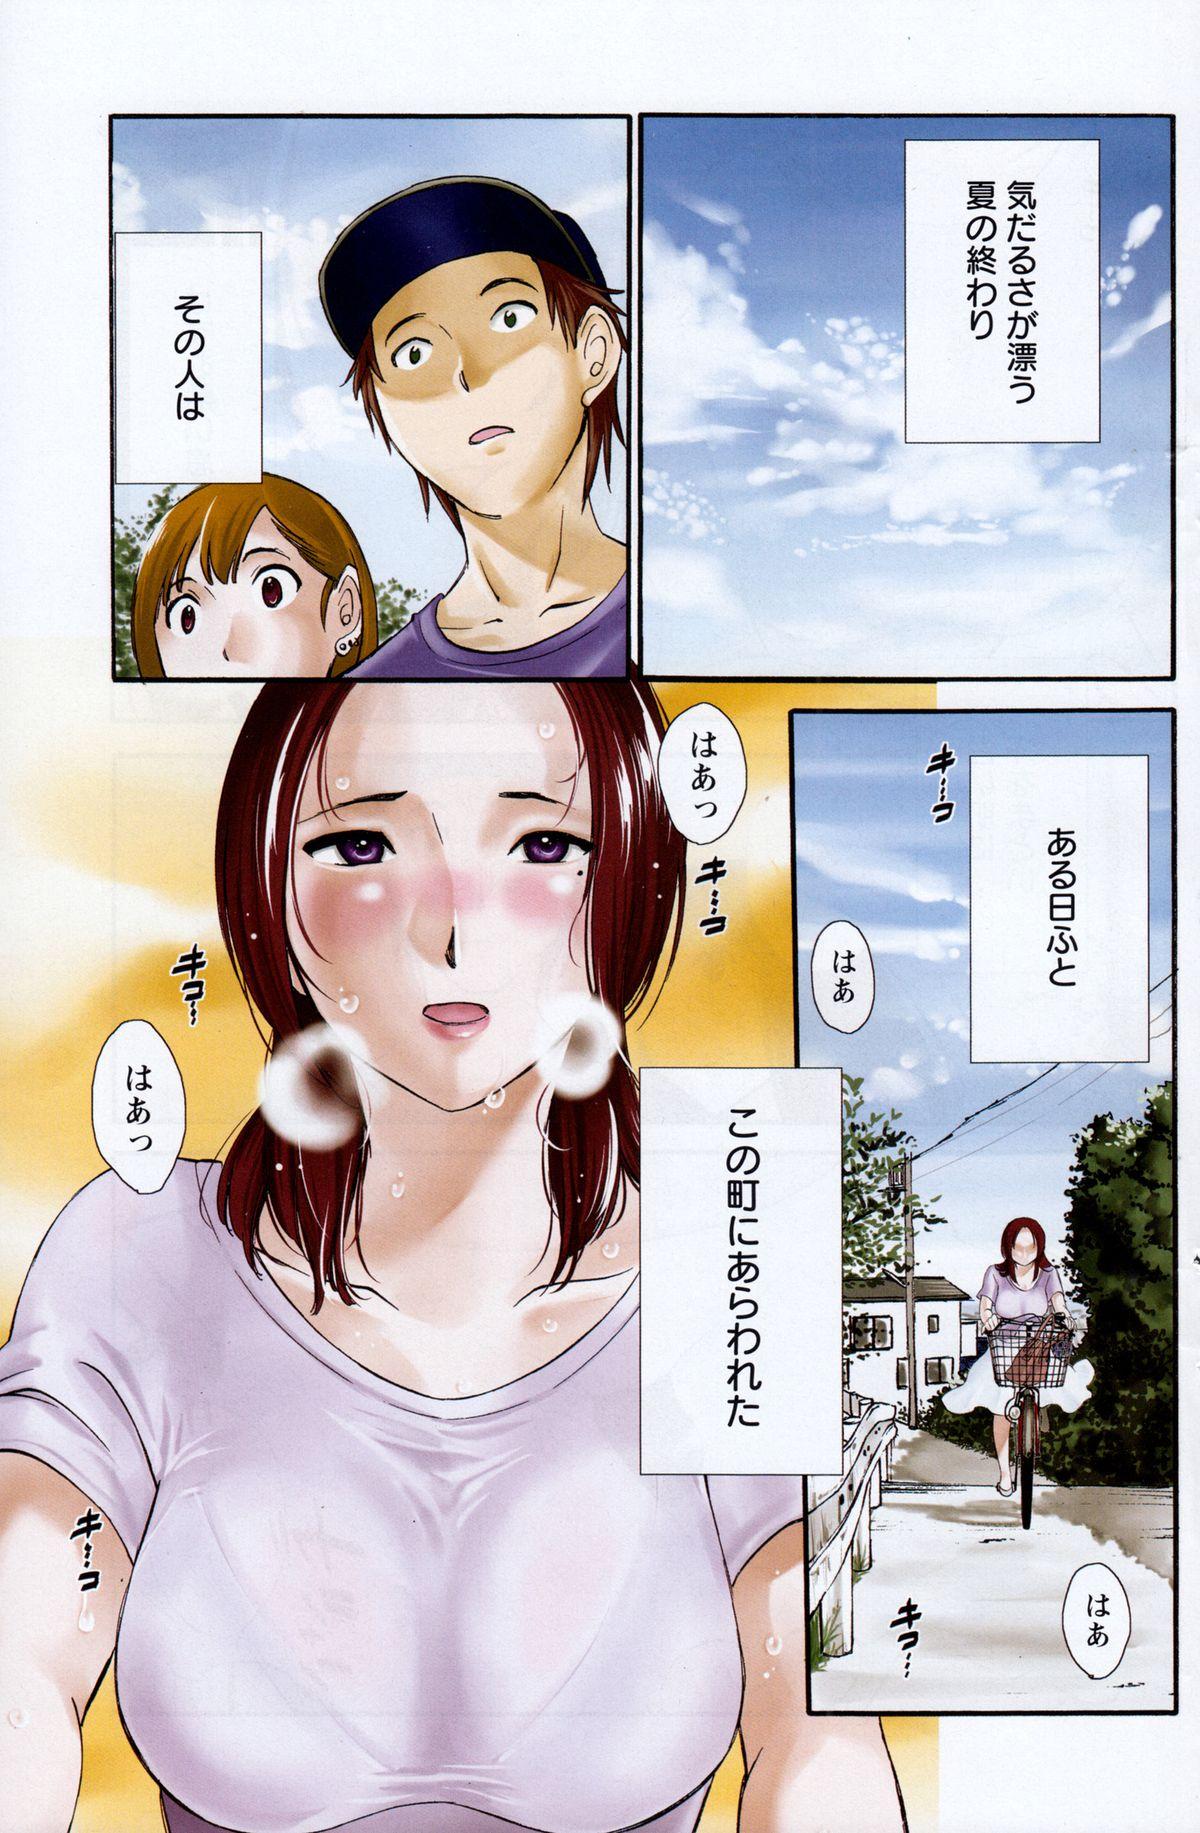 Playing [Miki Hime] Yureru Skirt - Fluttering Skirt Ch. 1-7 Rubia - Page 1